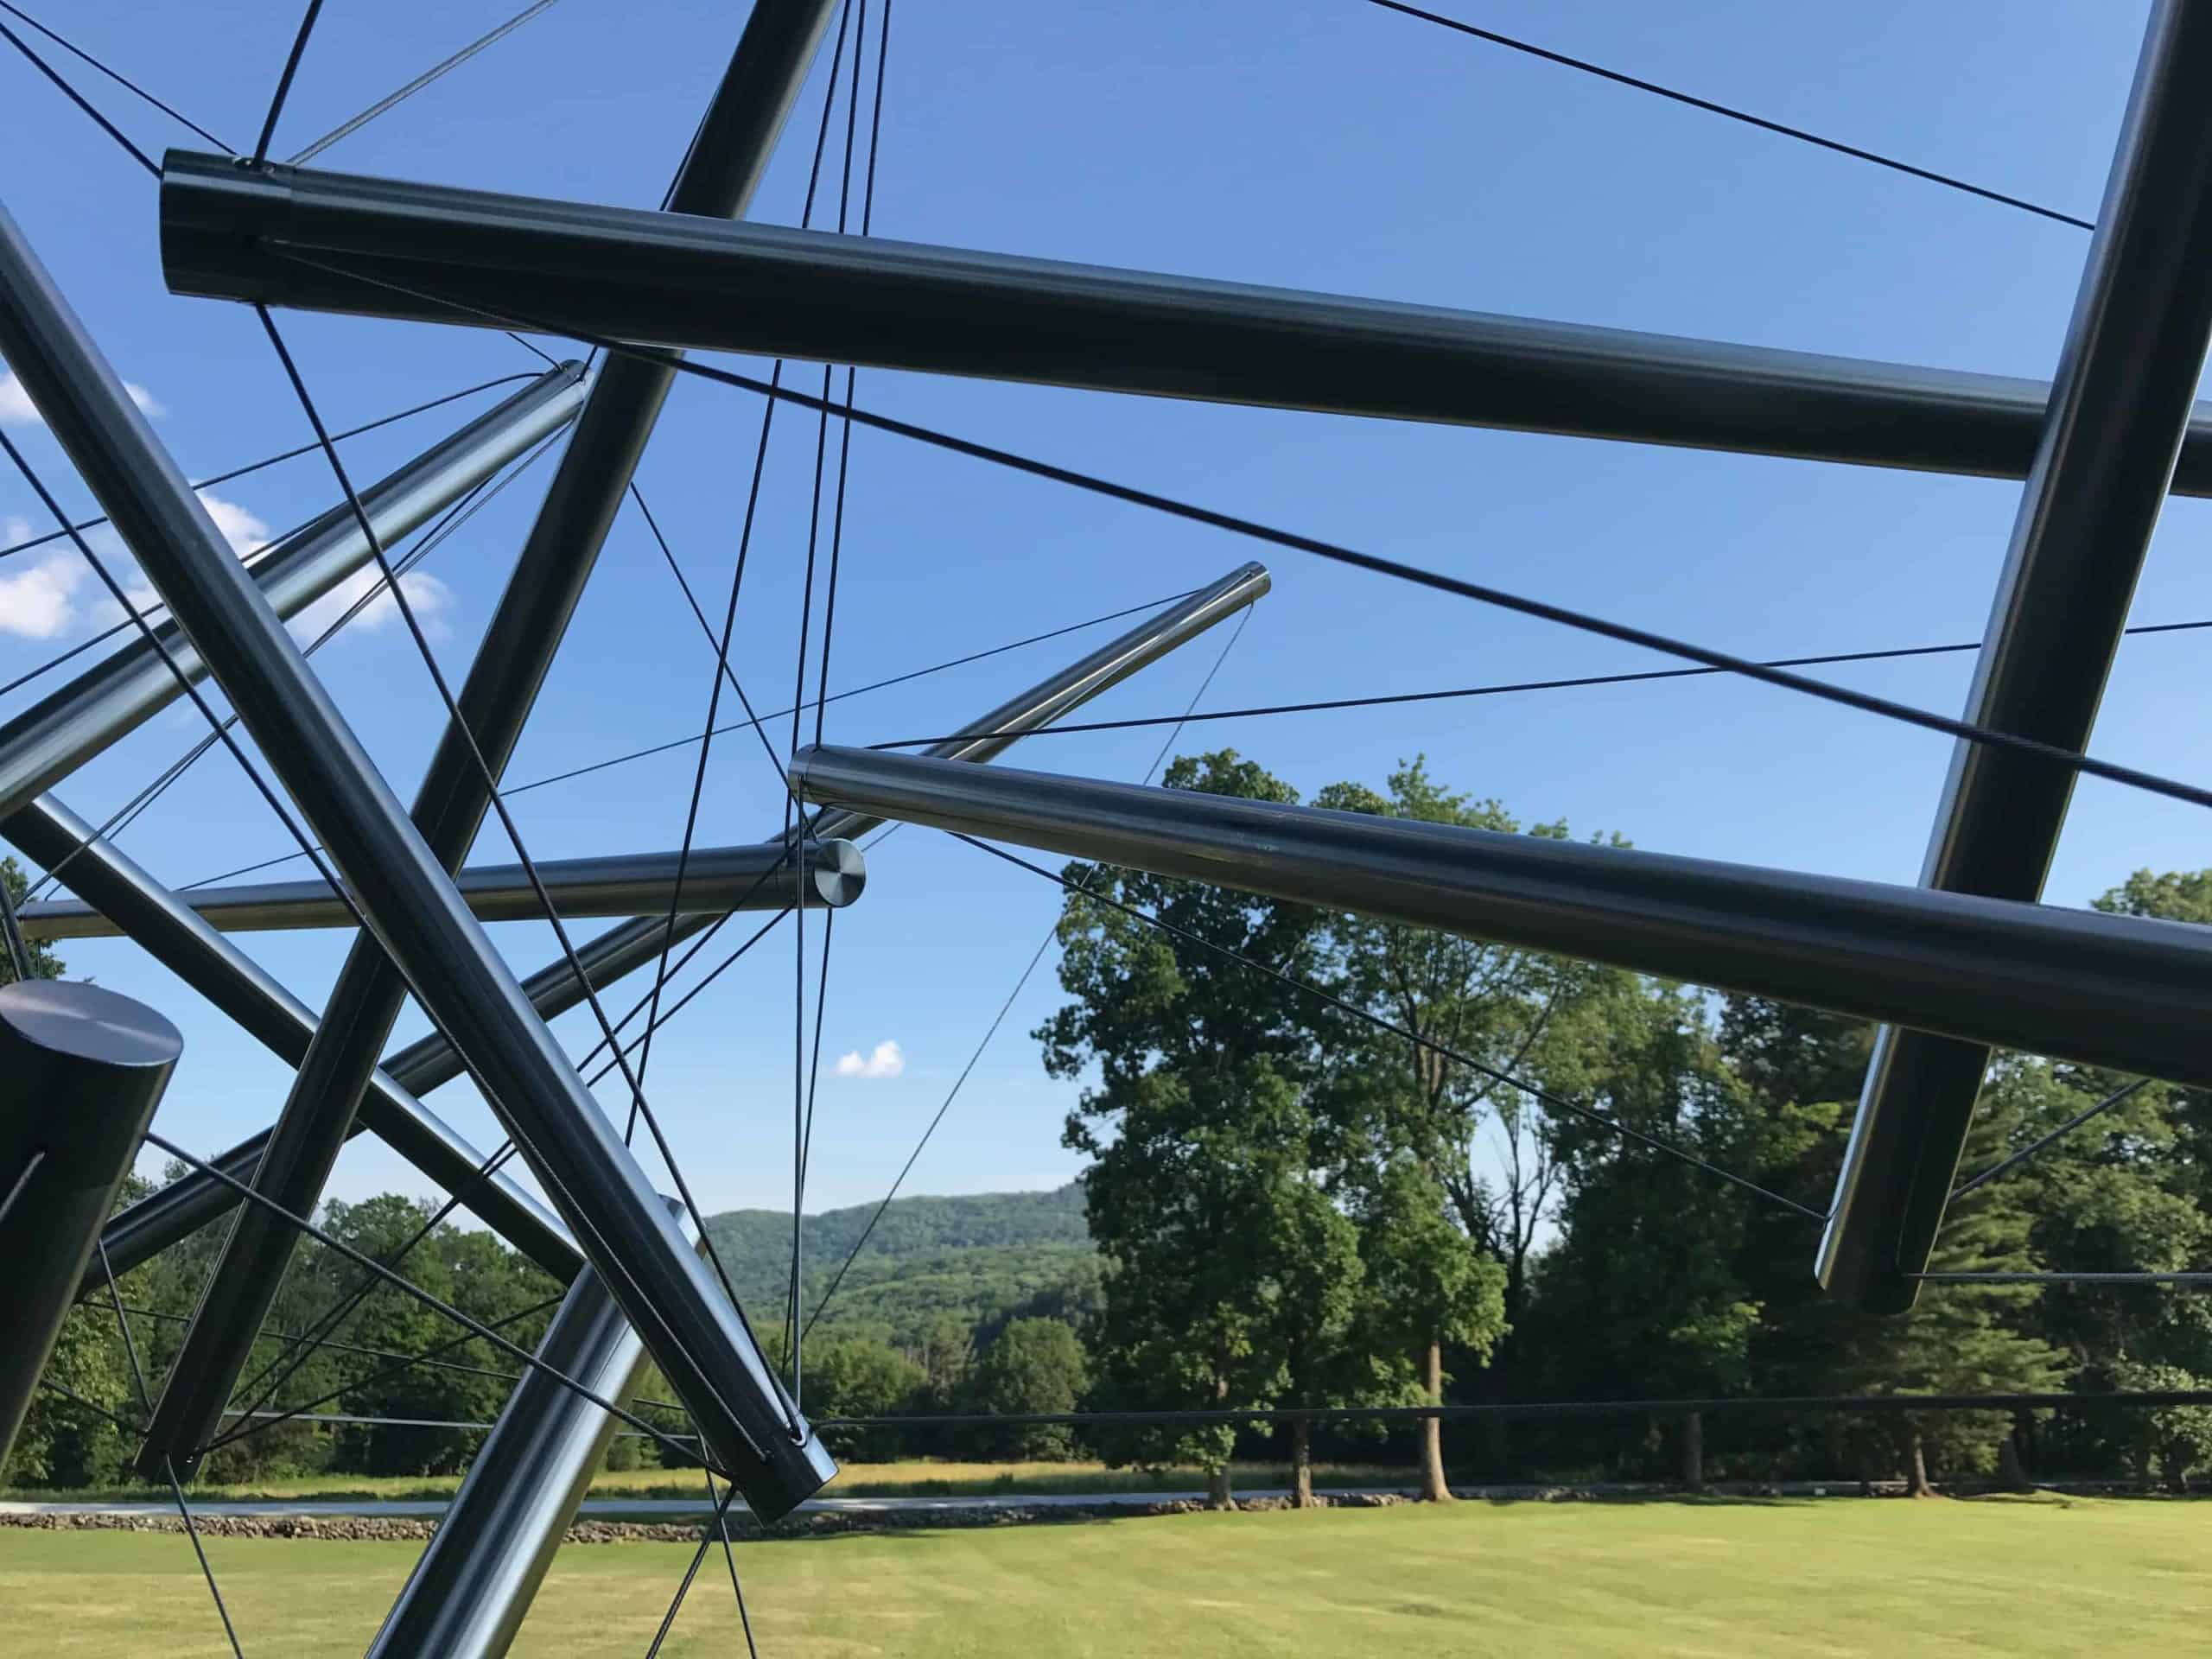 Kinetic sculpture at Chesterwood, summer 2018.